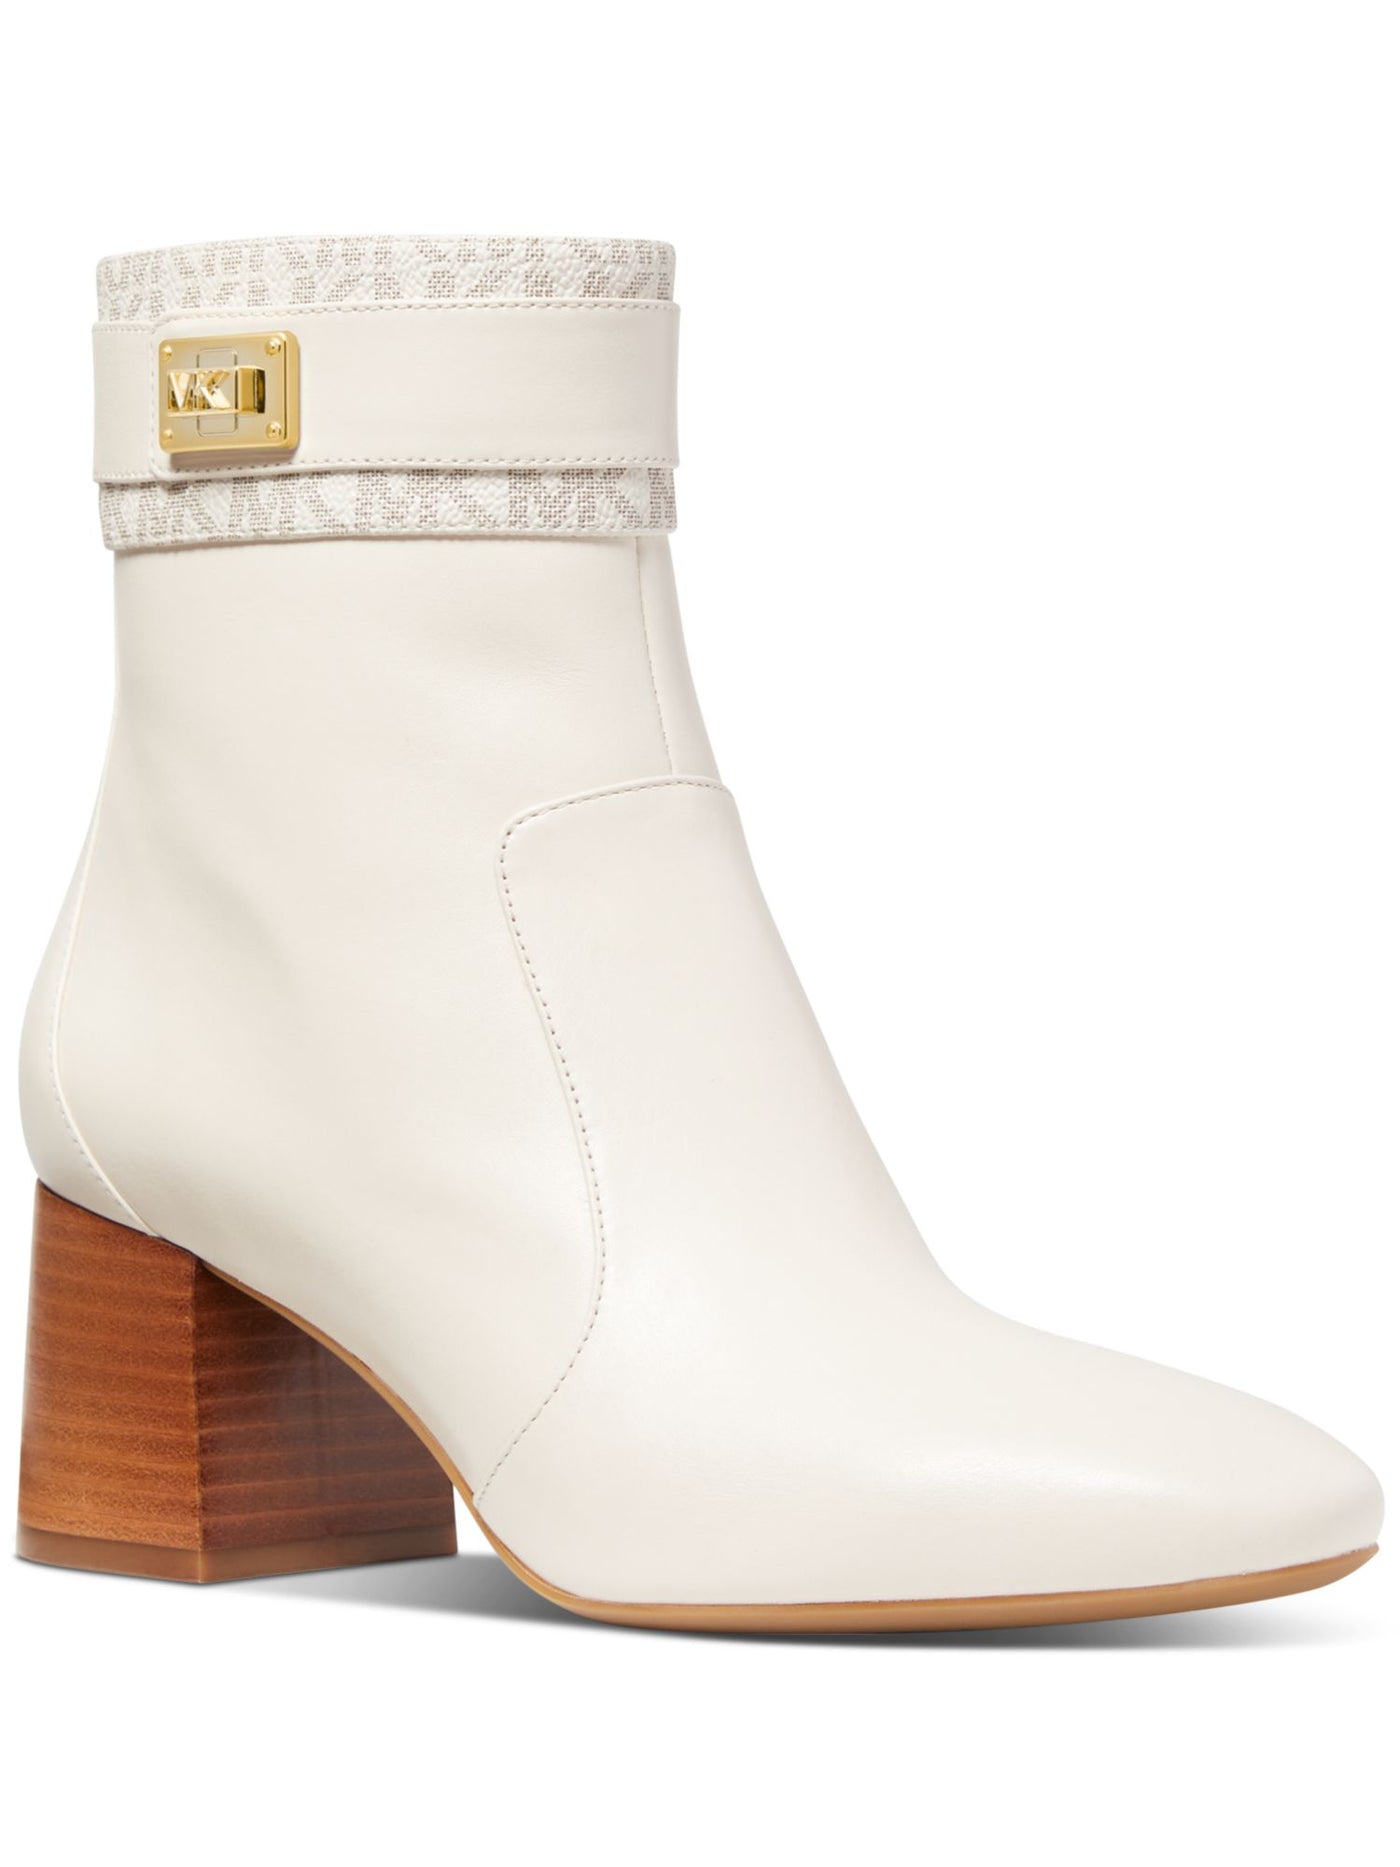 MICHAEL MICHAEL KORS Womens Ivory Signature Hardware Trim At Ankle-Strap Padded Padma Almond Toe Block Heel Zip-Up Leather Heeled Boots 10 M